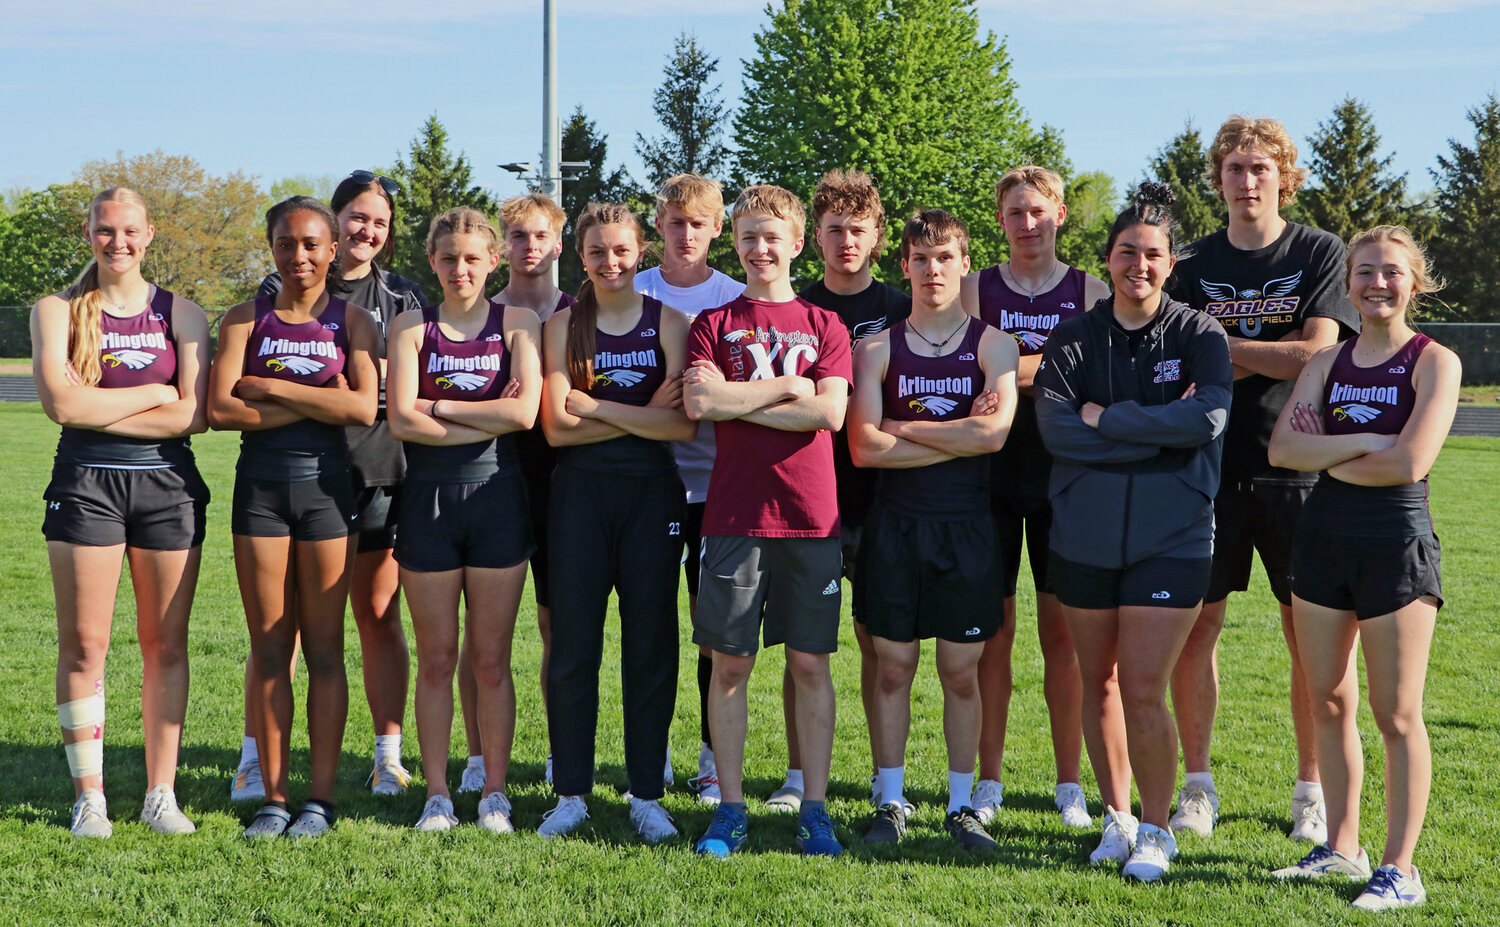 Fourteen Arlington Eagles earned NSAA State Track and Field Championship berths May 9 during the Class C-2 District Meet in David City. Front row, from left: Austyn Flesner, Kelise Krivohlavek, Whitney Wollberg, Hailey O'Daniel, Kolby Tighe, Trey Hill, Taylor Arp and Brooke Hilgenkamp. Back row: Hayley Arp, Kevin Flesner, Kaden Foust, Dallin Franzluebbers, Nolan May and Trent Koger.